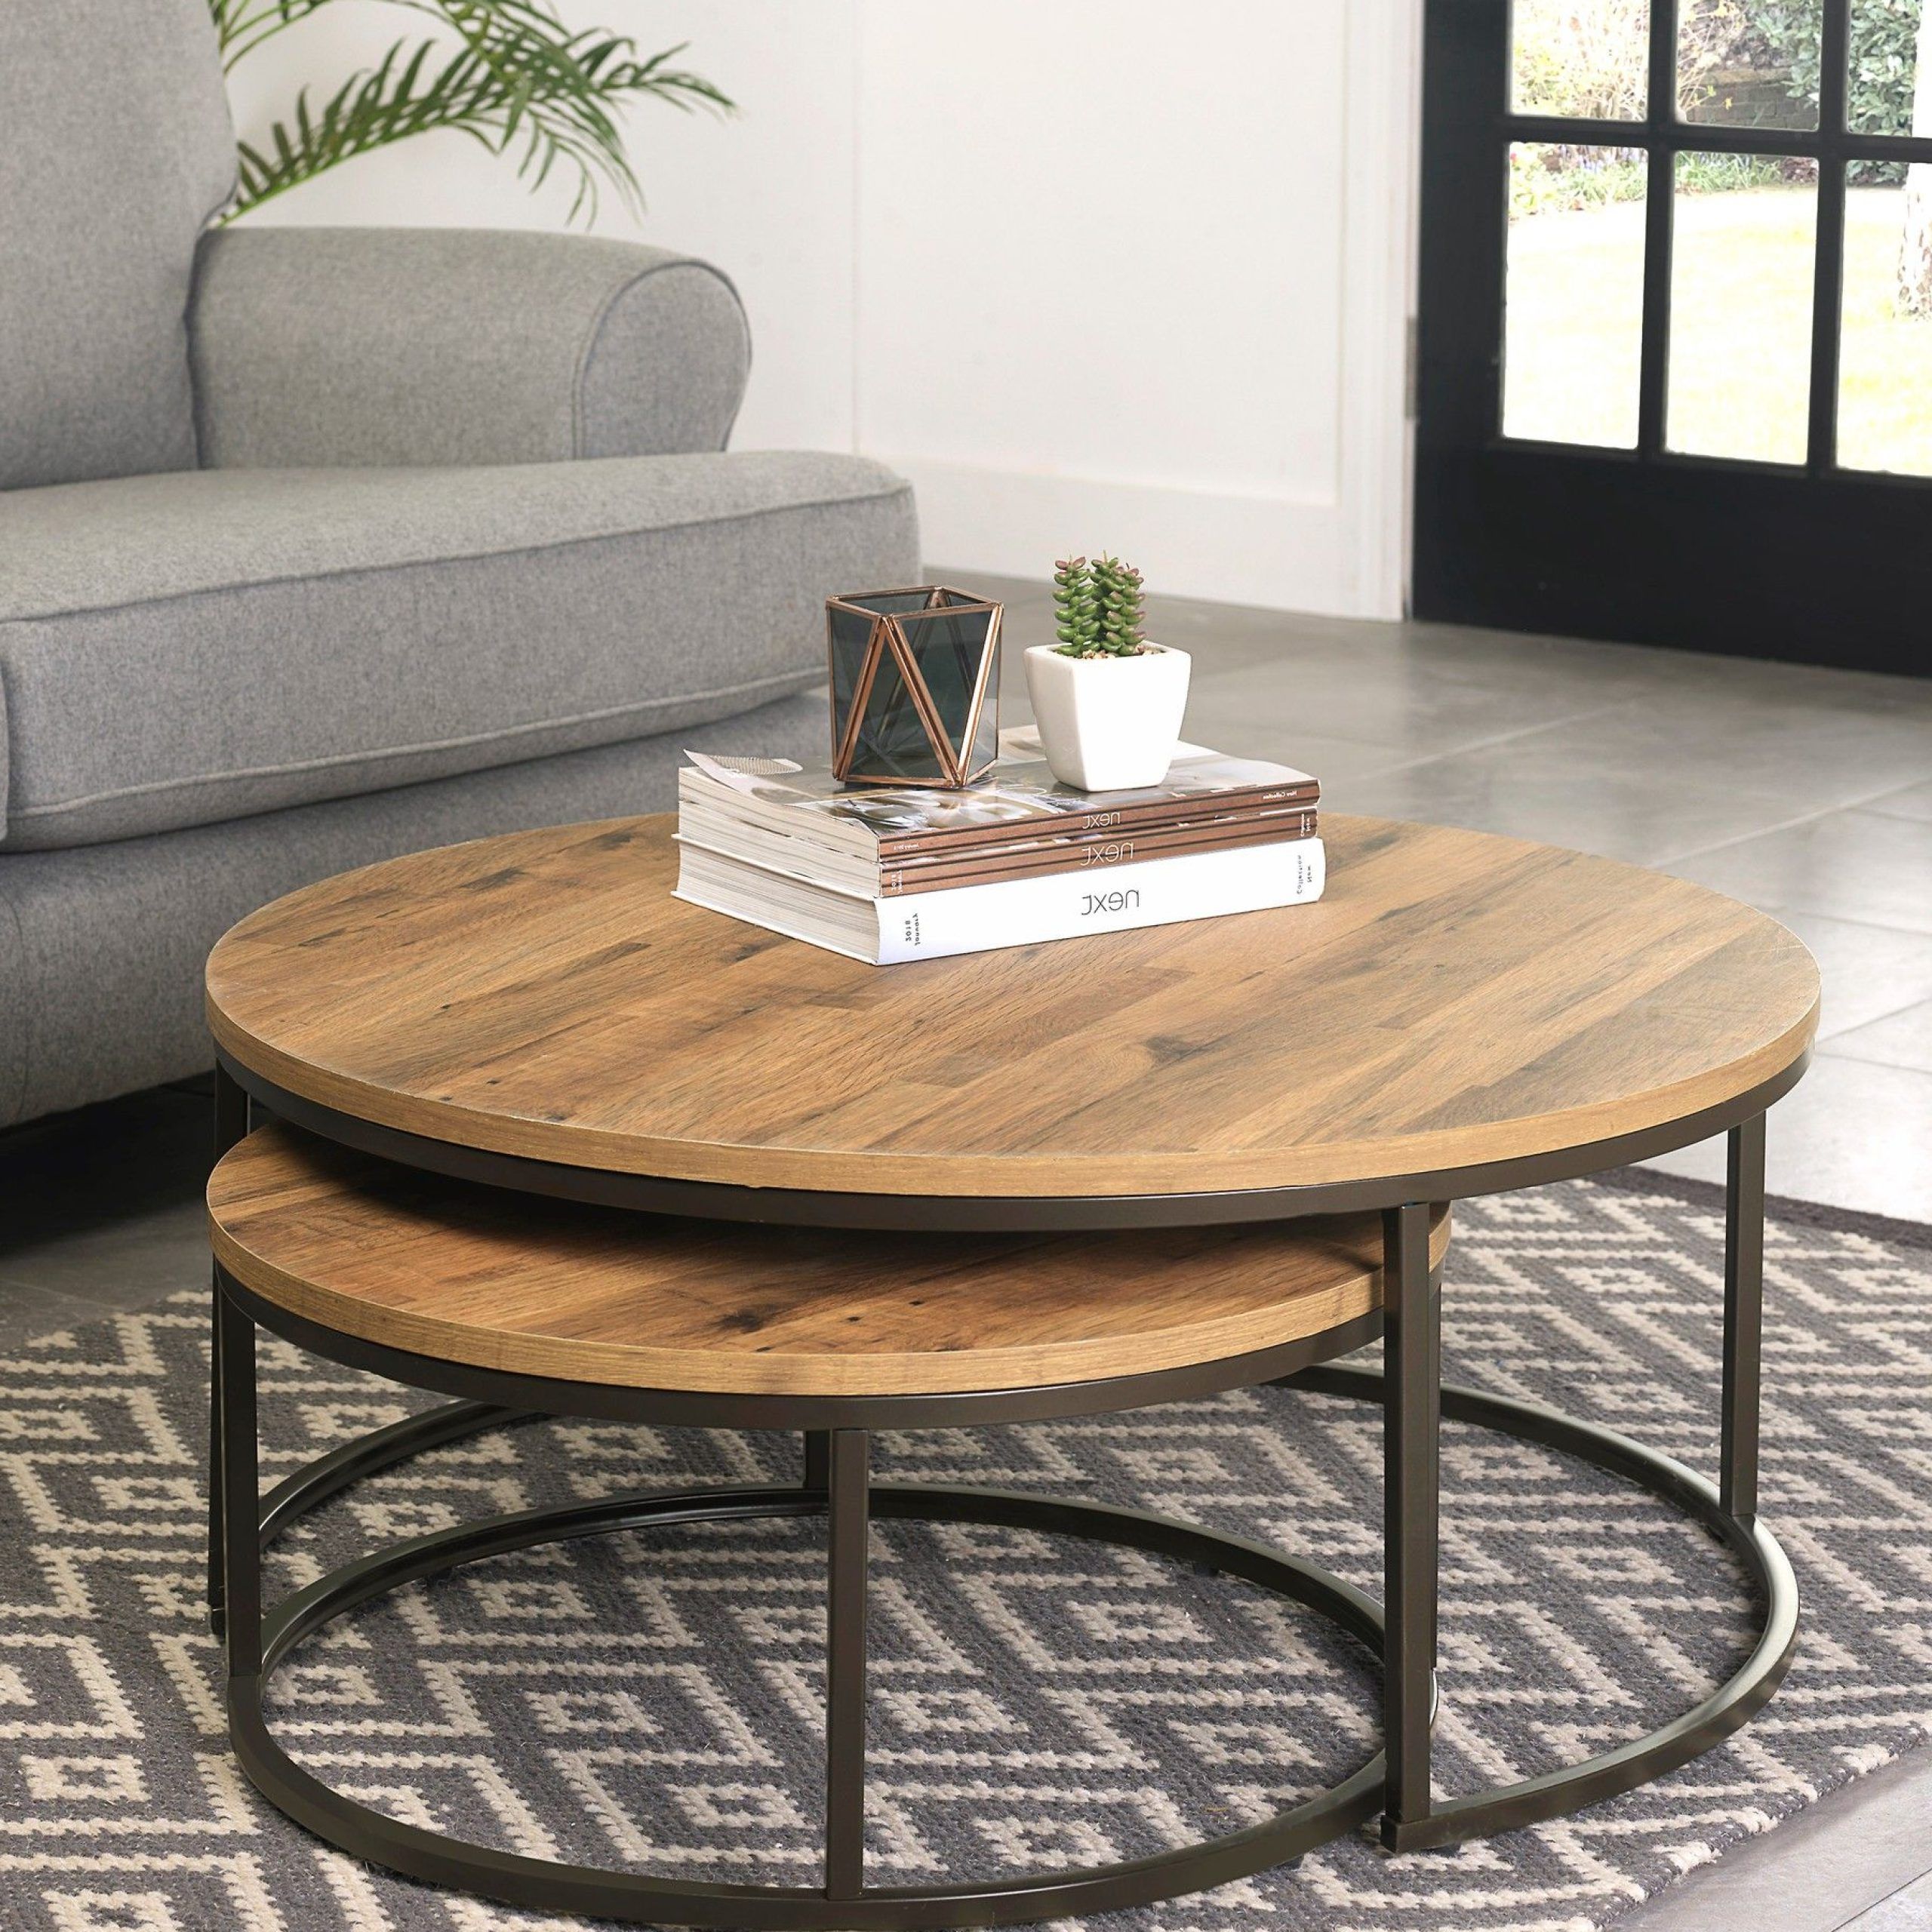 Modern Coffee Table Decor (View 12 of 15)